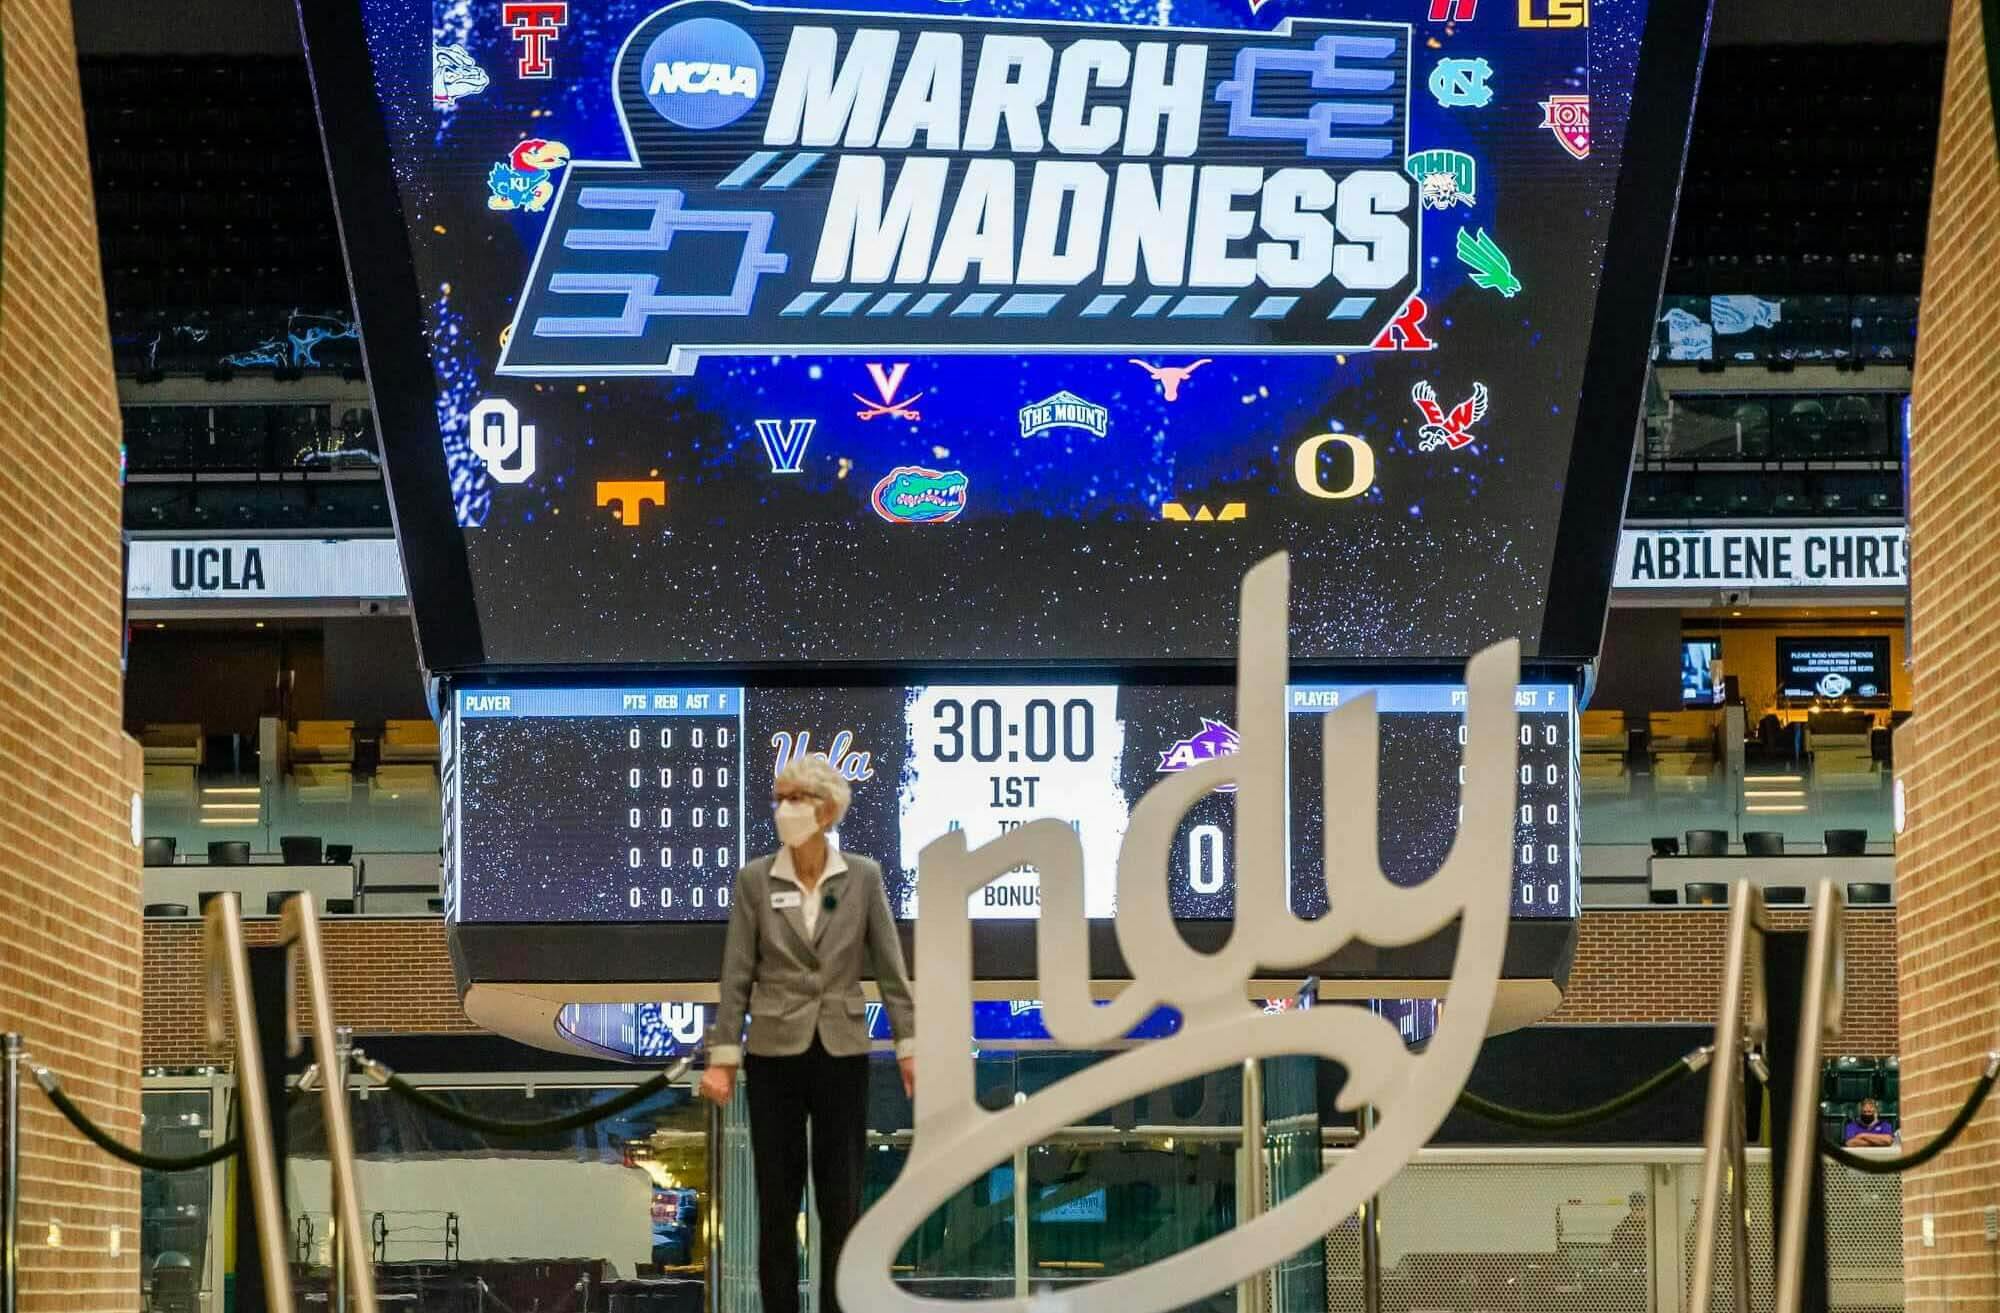 Ushers wait for fans to file into the venue before the UCLA vs. Abilene Christian NCAA men s basketball tournament game Monday, March 22, 2021 at Bankers Life Fieldhouse in Indianapolis, Indiana. Indy Hoops Feature